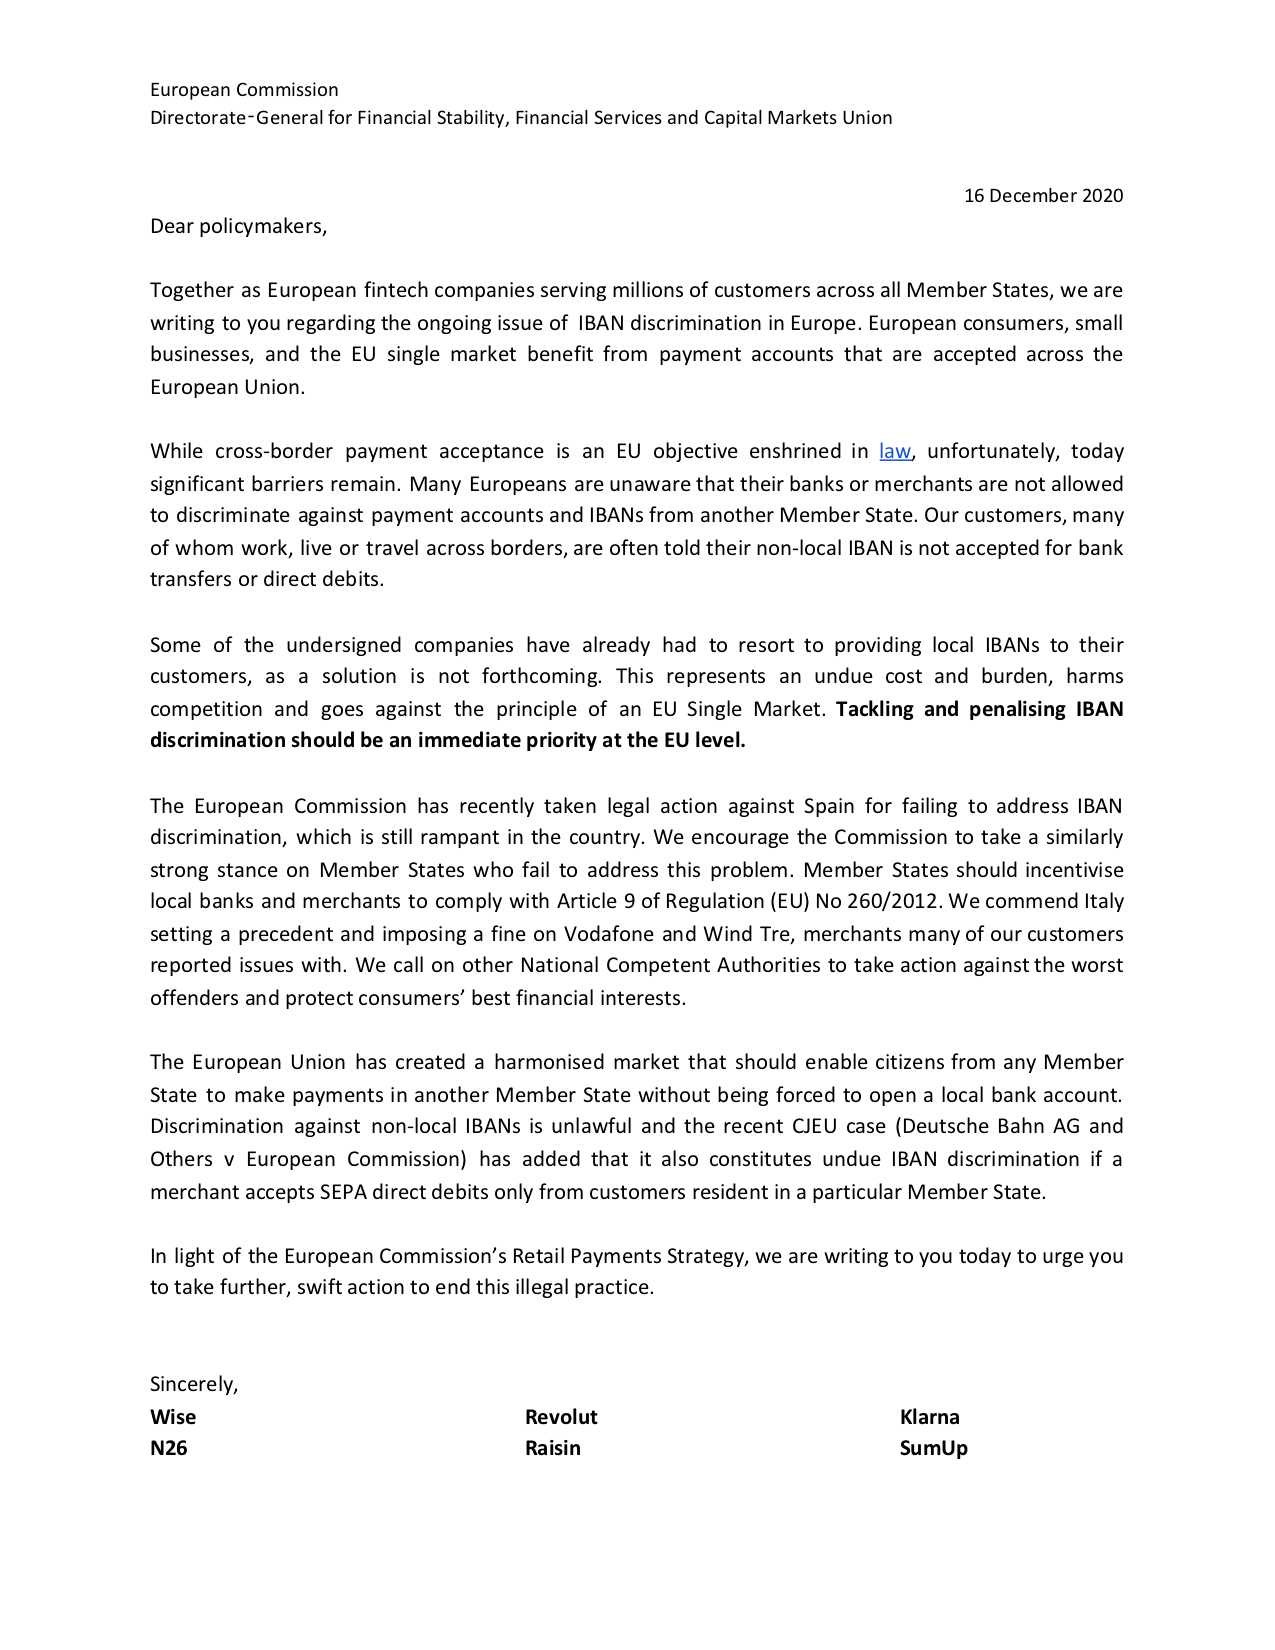 Letter to the European Commission